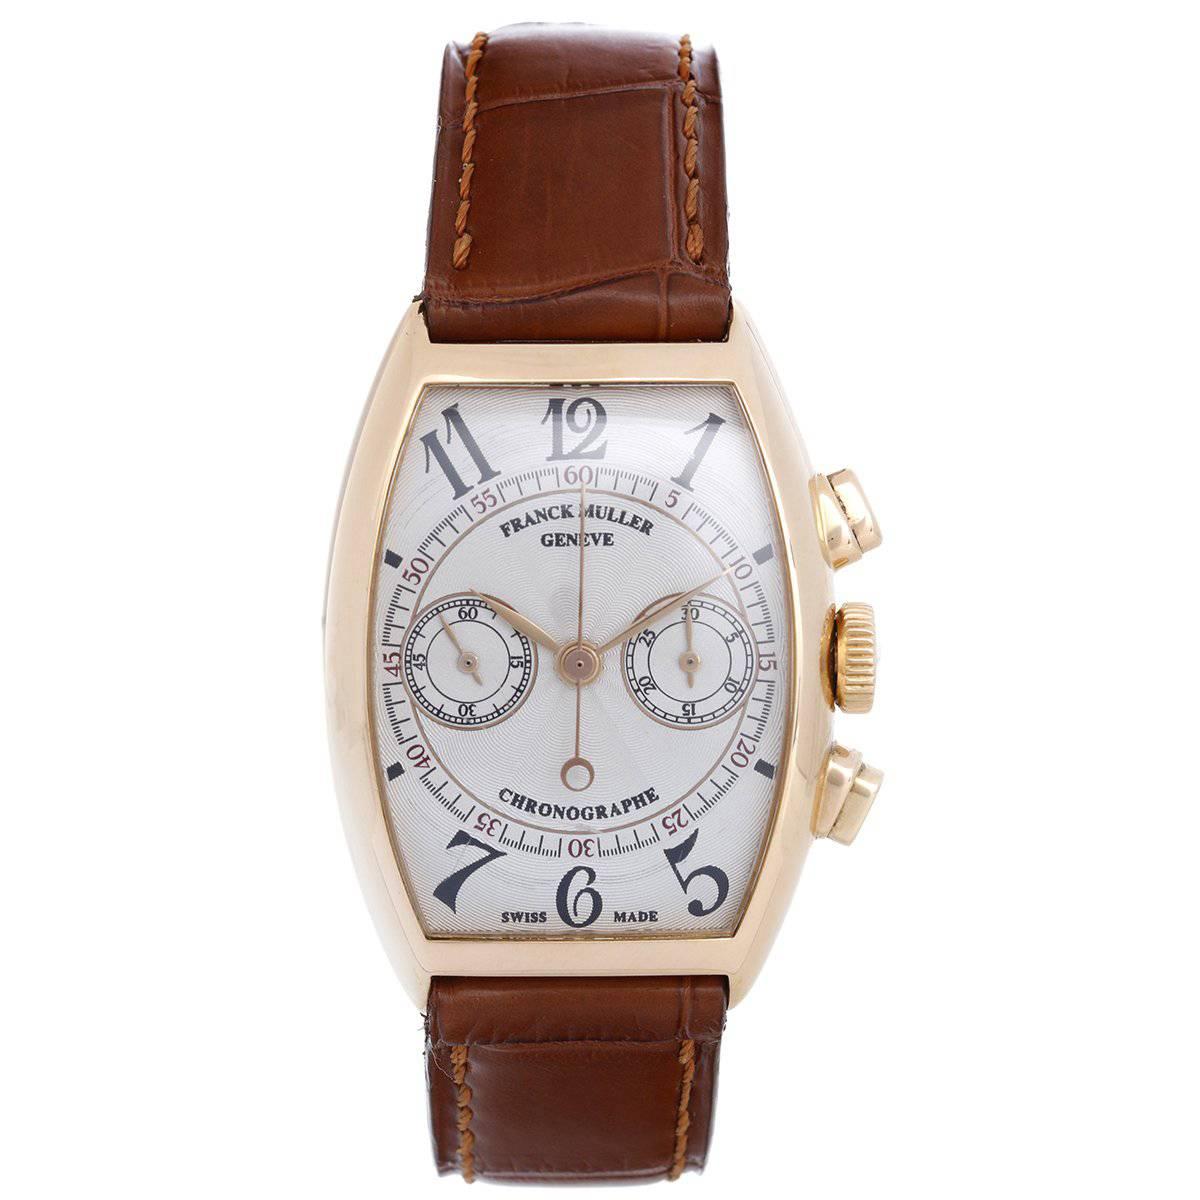 Franck Muller Rose Gold Chronograph Automatic Winding Wristwatch 5850 CC